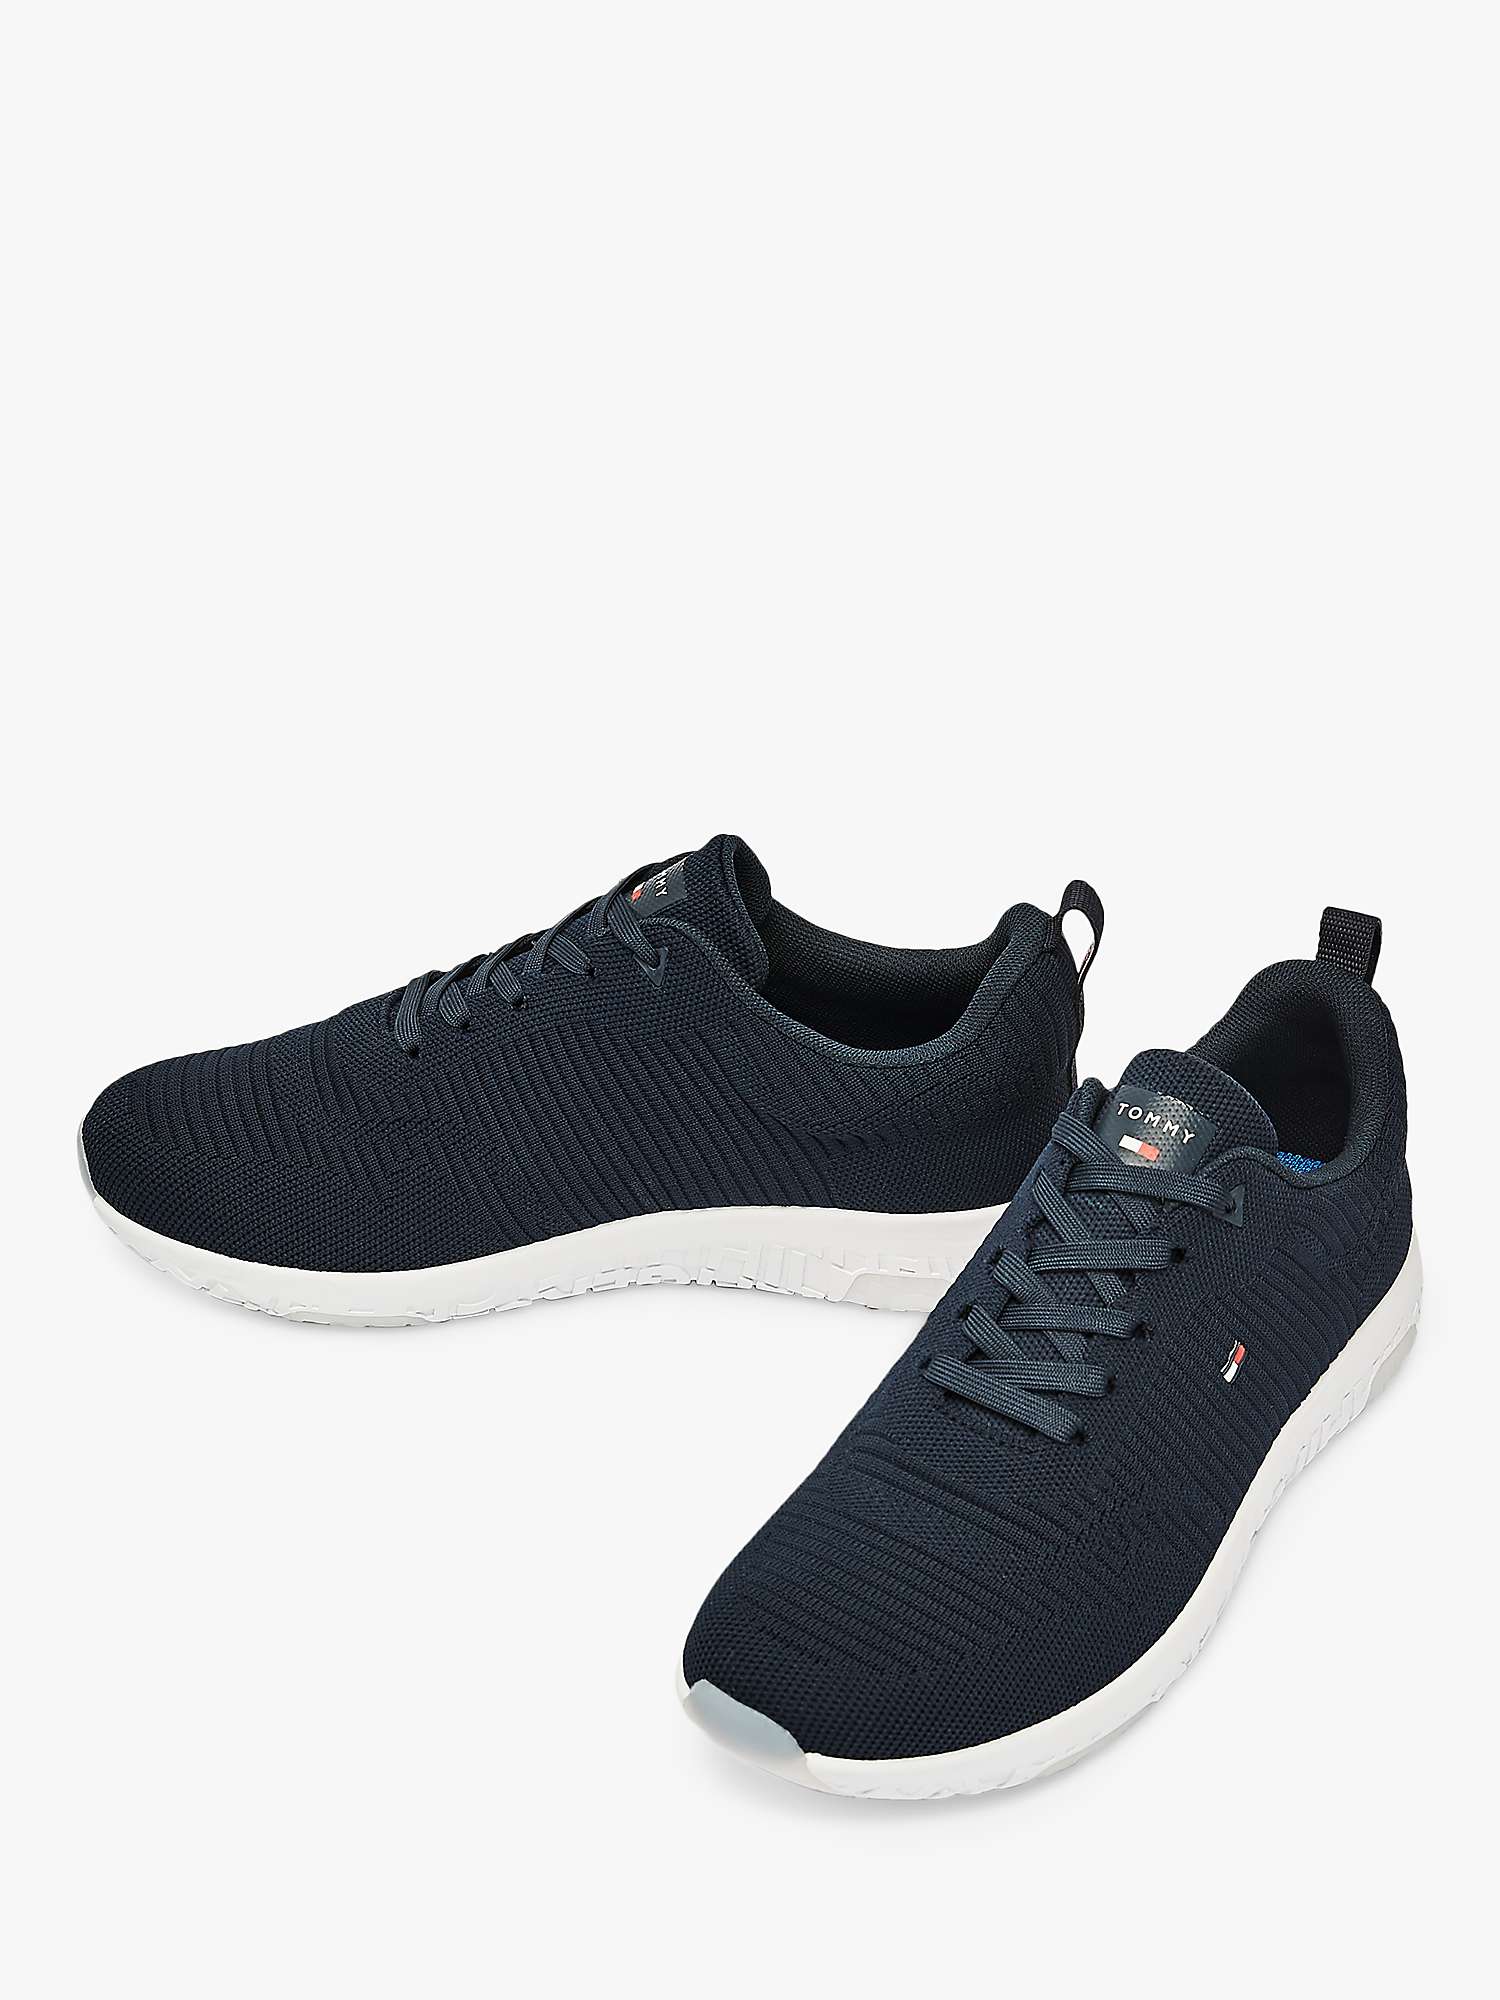 Buy Tommy Hilfiger Corporate Knit Runner Trainers, Desert Sky Online at johnlewis.com